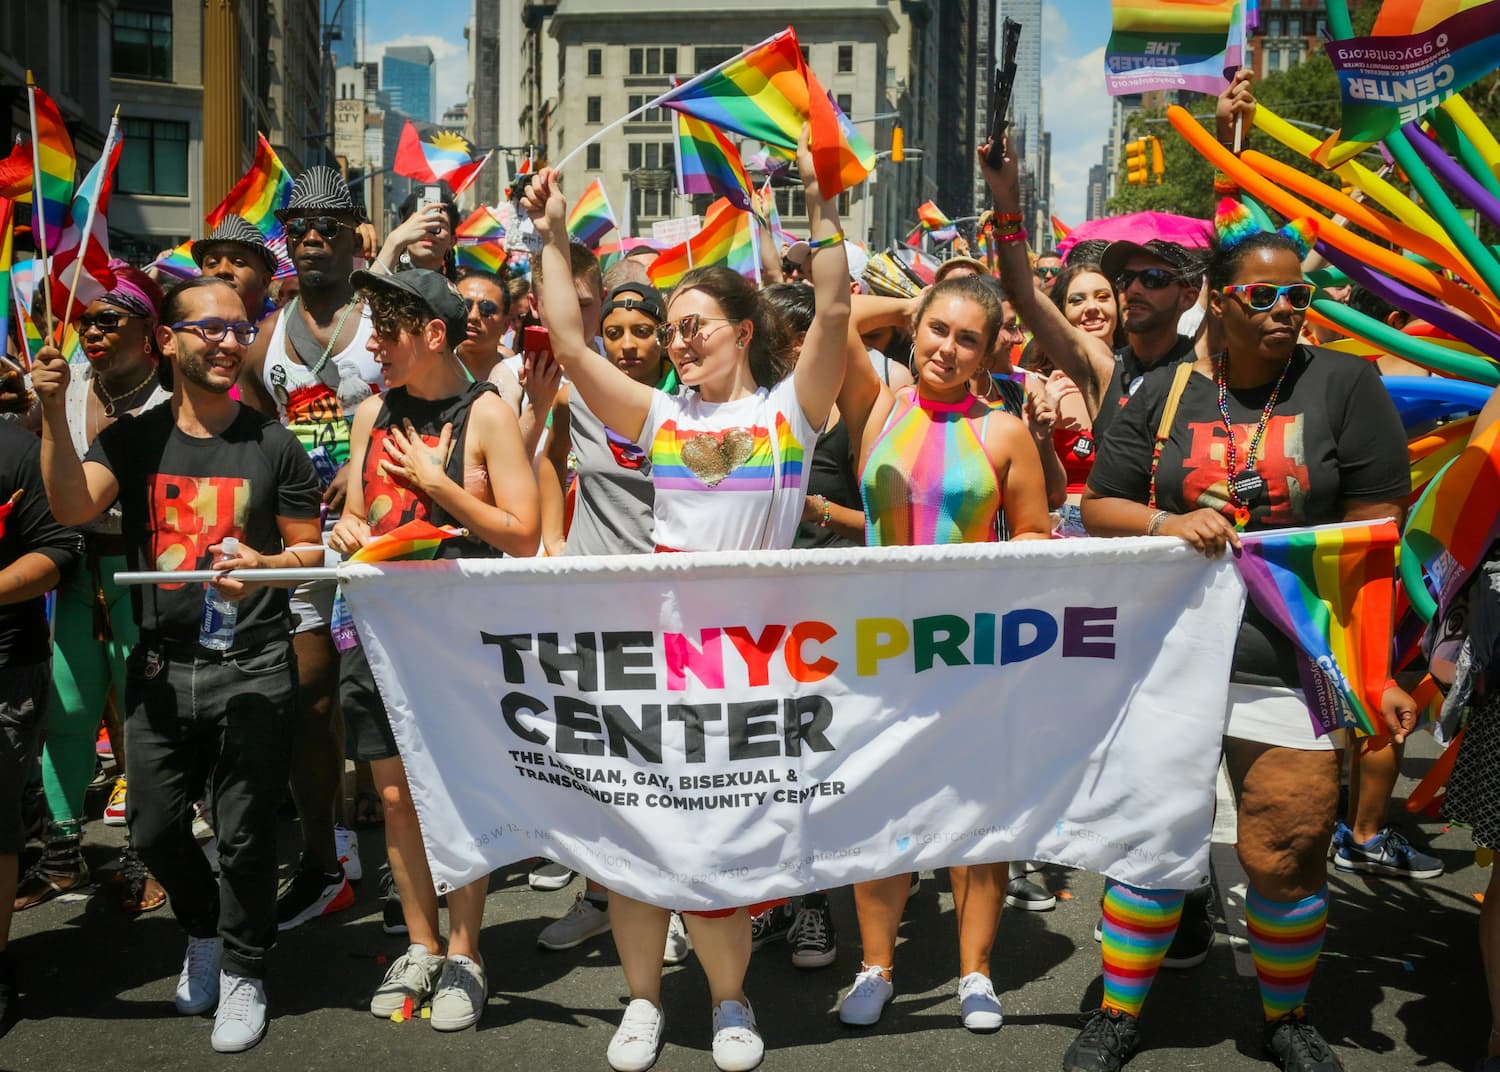  People participate in an Pride parade in New York City